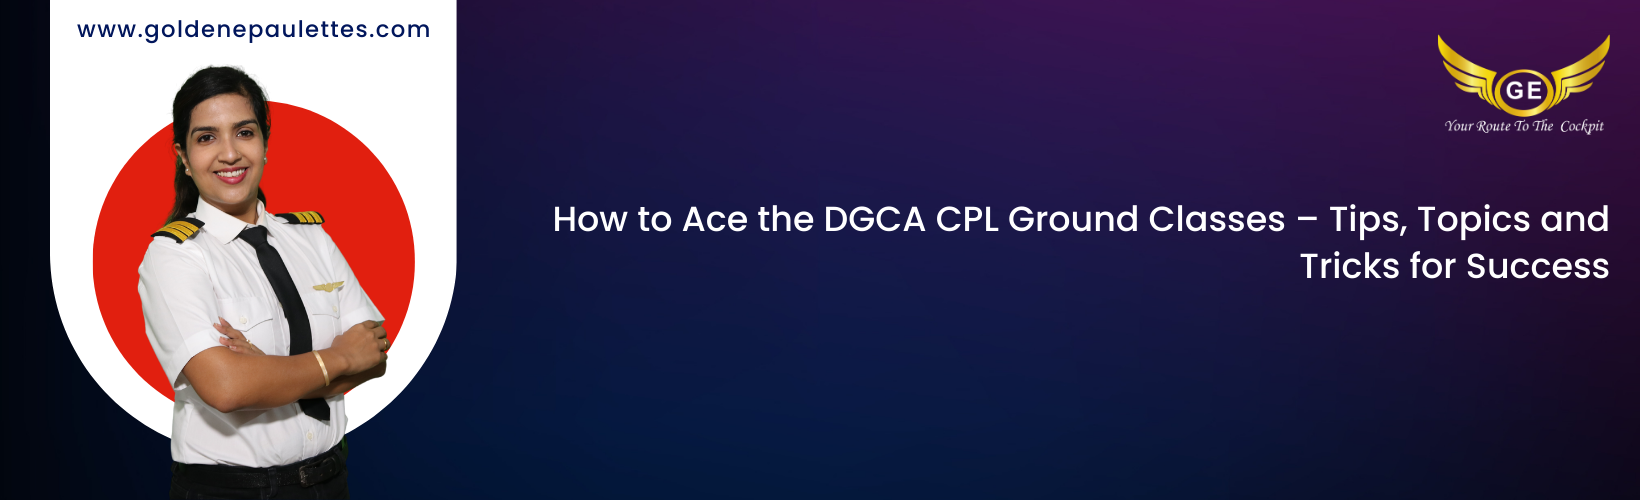 The Best Resources for the DGCA CPL Ground Classes